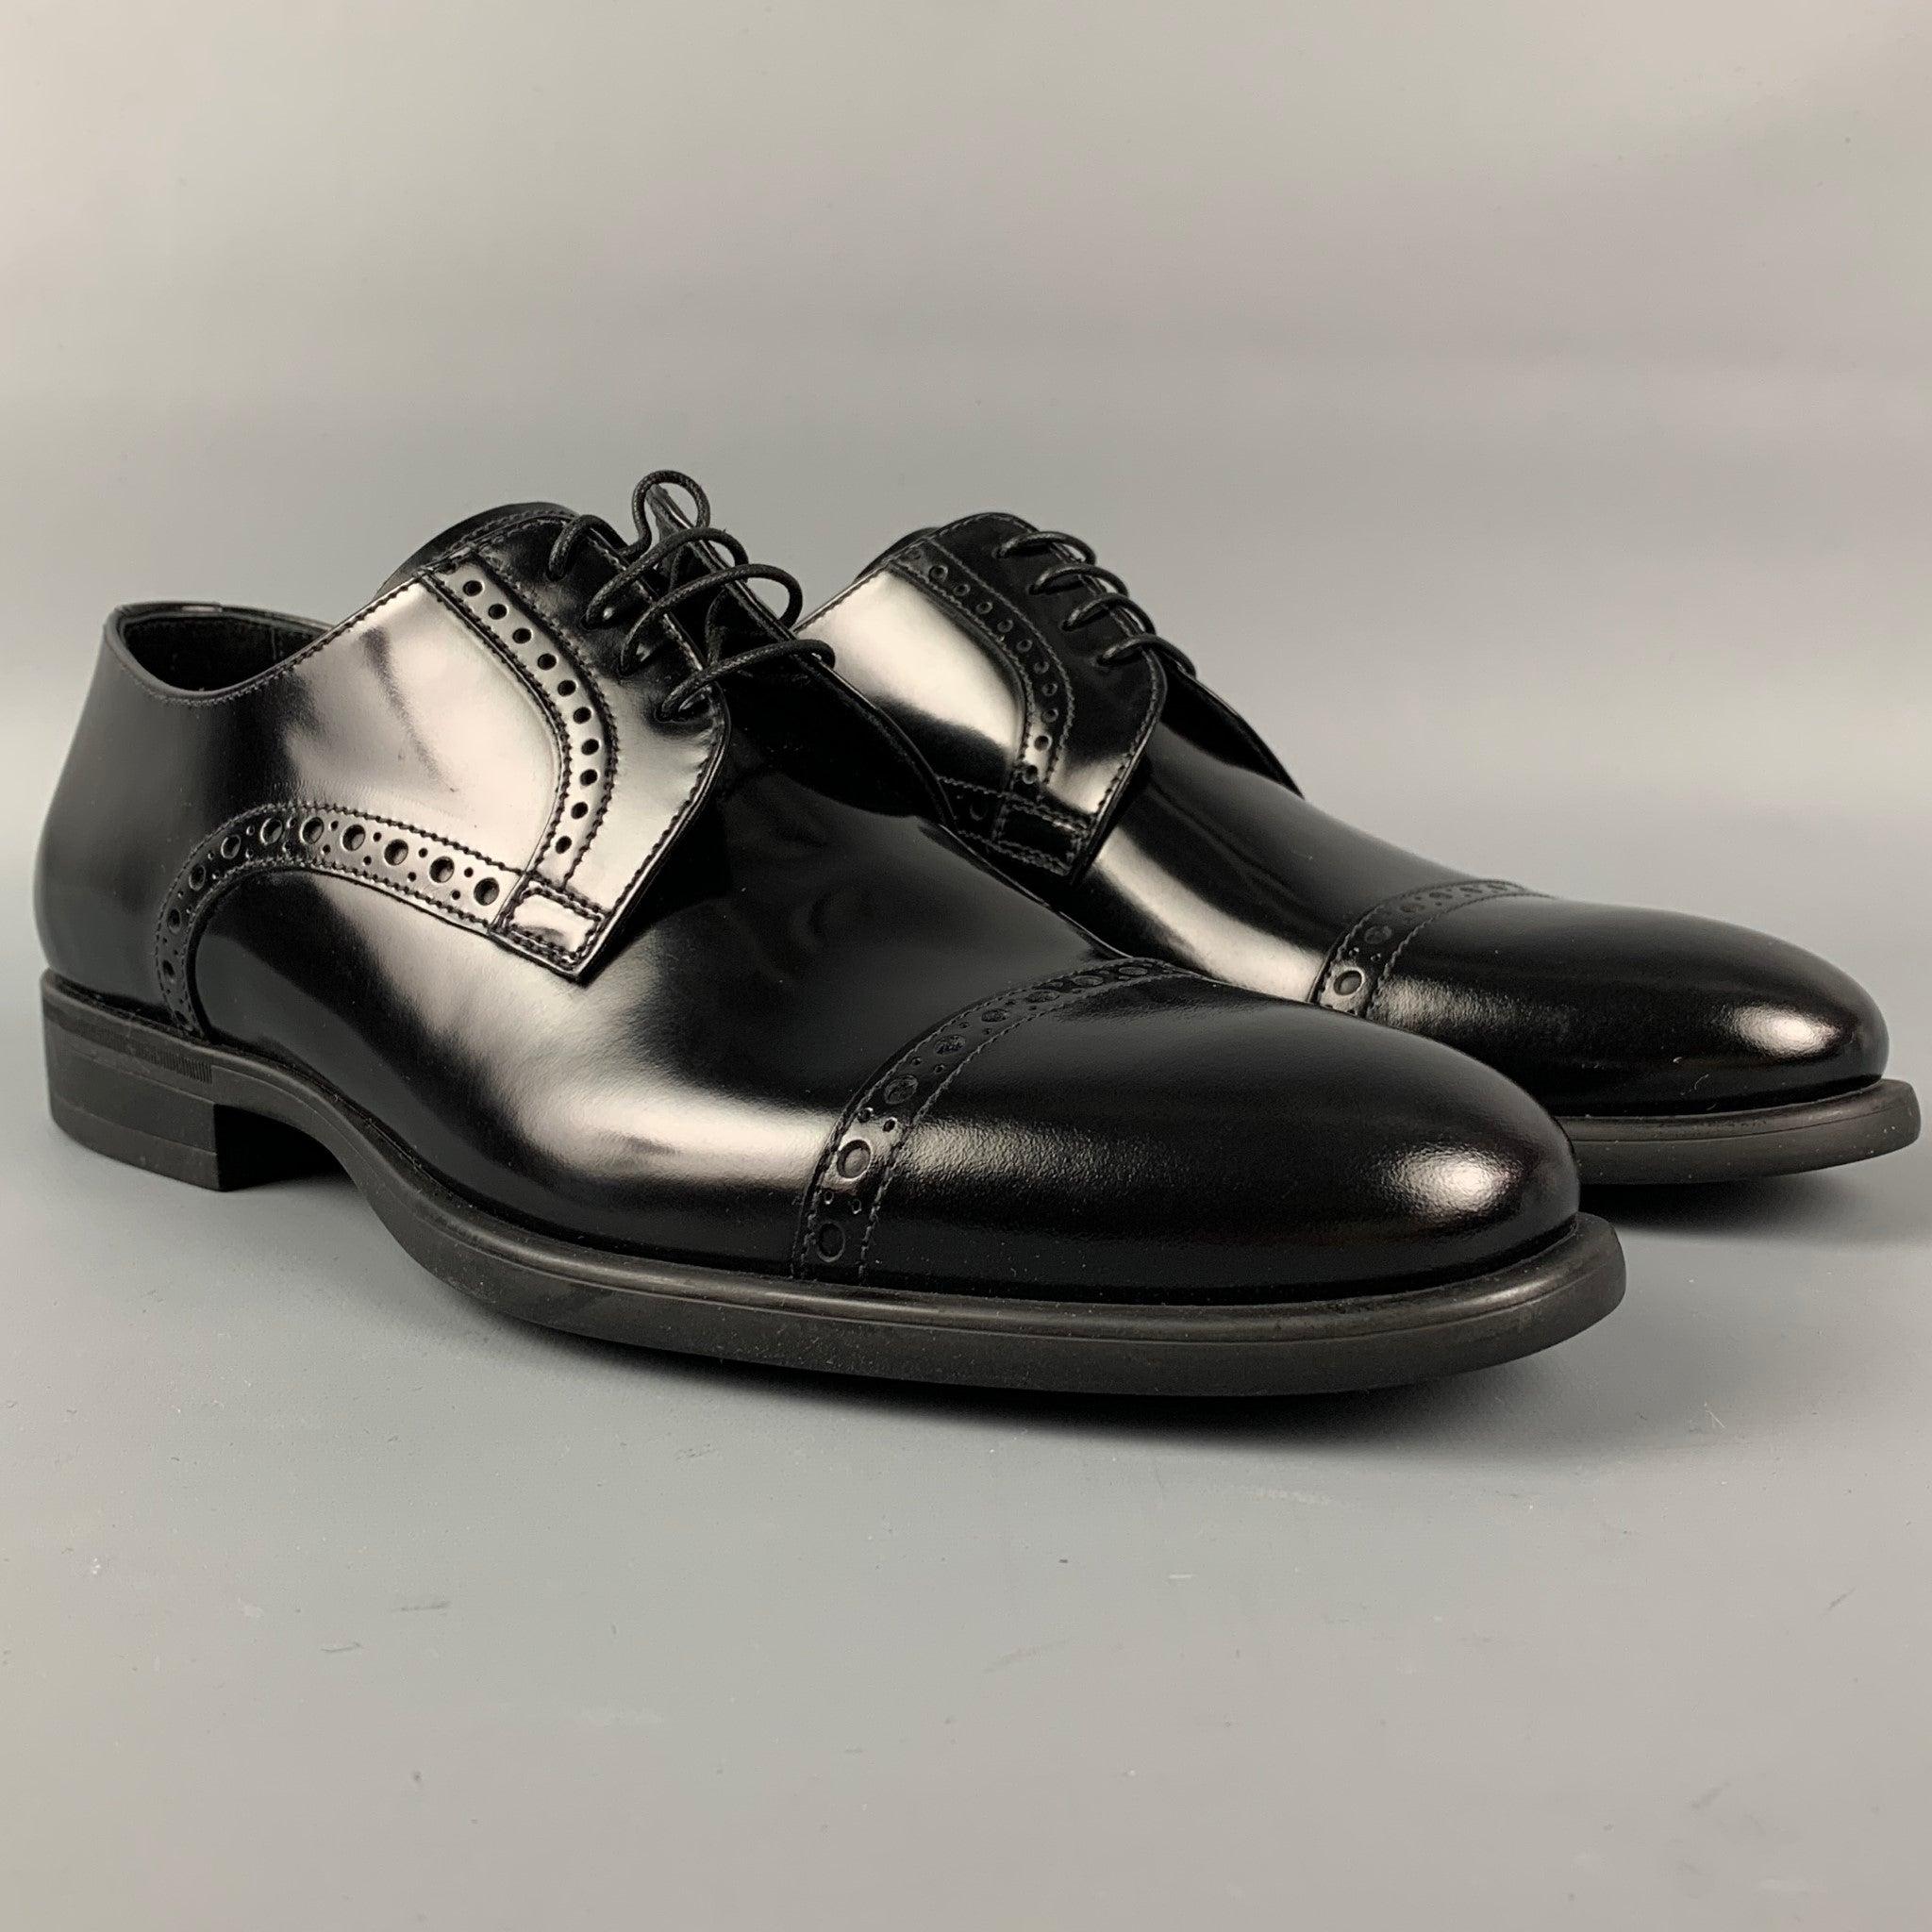 ARMANI COLLEZIONI shoes comes in a black perforated patent leather featuring a cap toe, stacked heel, and a lace up closure.
New With Box.
 

Marked:   X6C052 41Outsole: 11.5 inches  x 4 inches 
  
  
 
Reference: 111470
Category: Lace Up Shoes
More